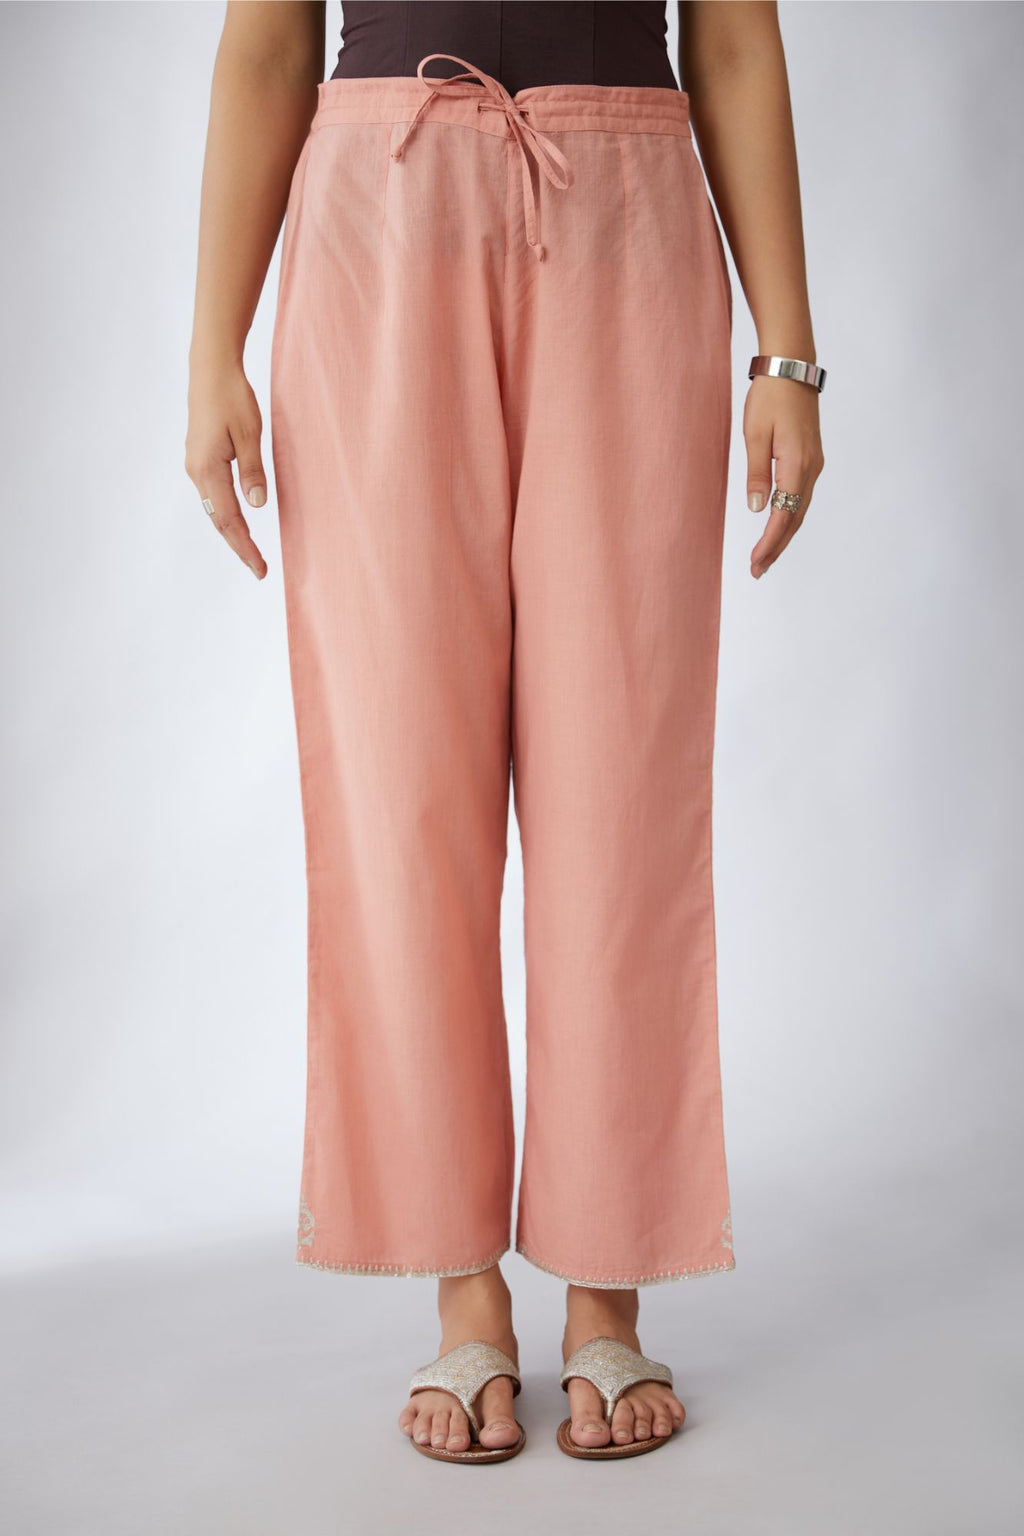 Salmon cotton straight pants with silver embroidery detailing at bottom hem (Pants)